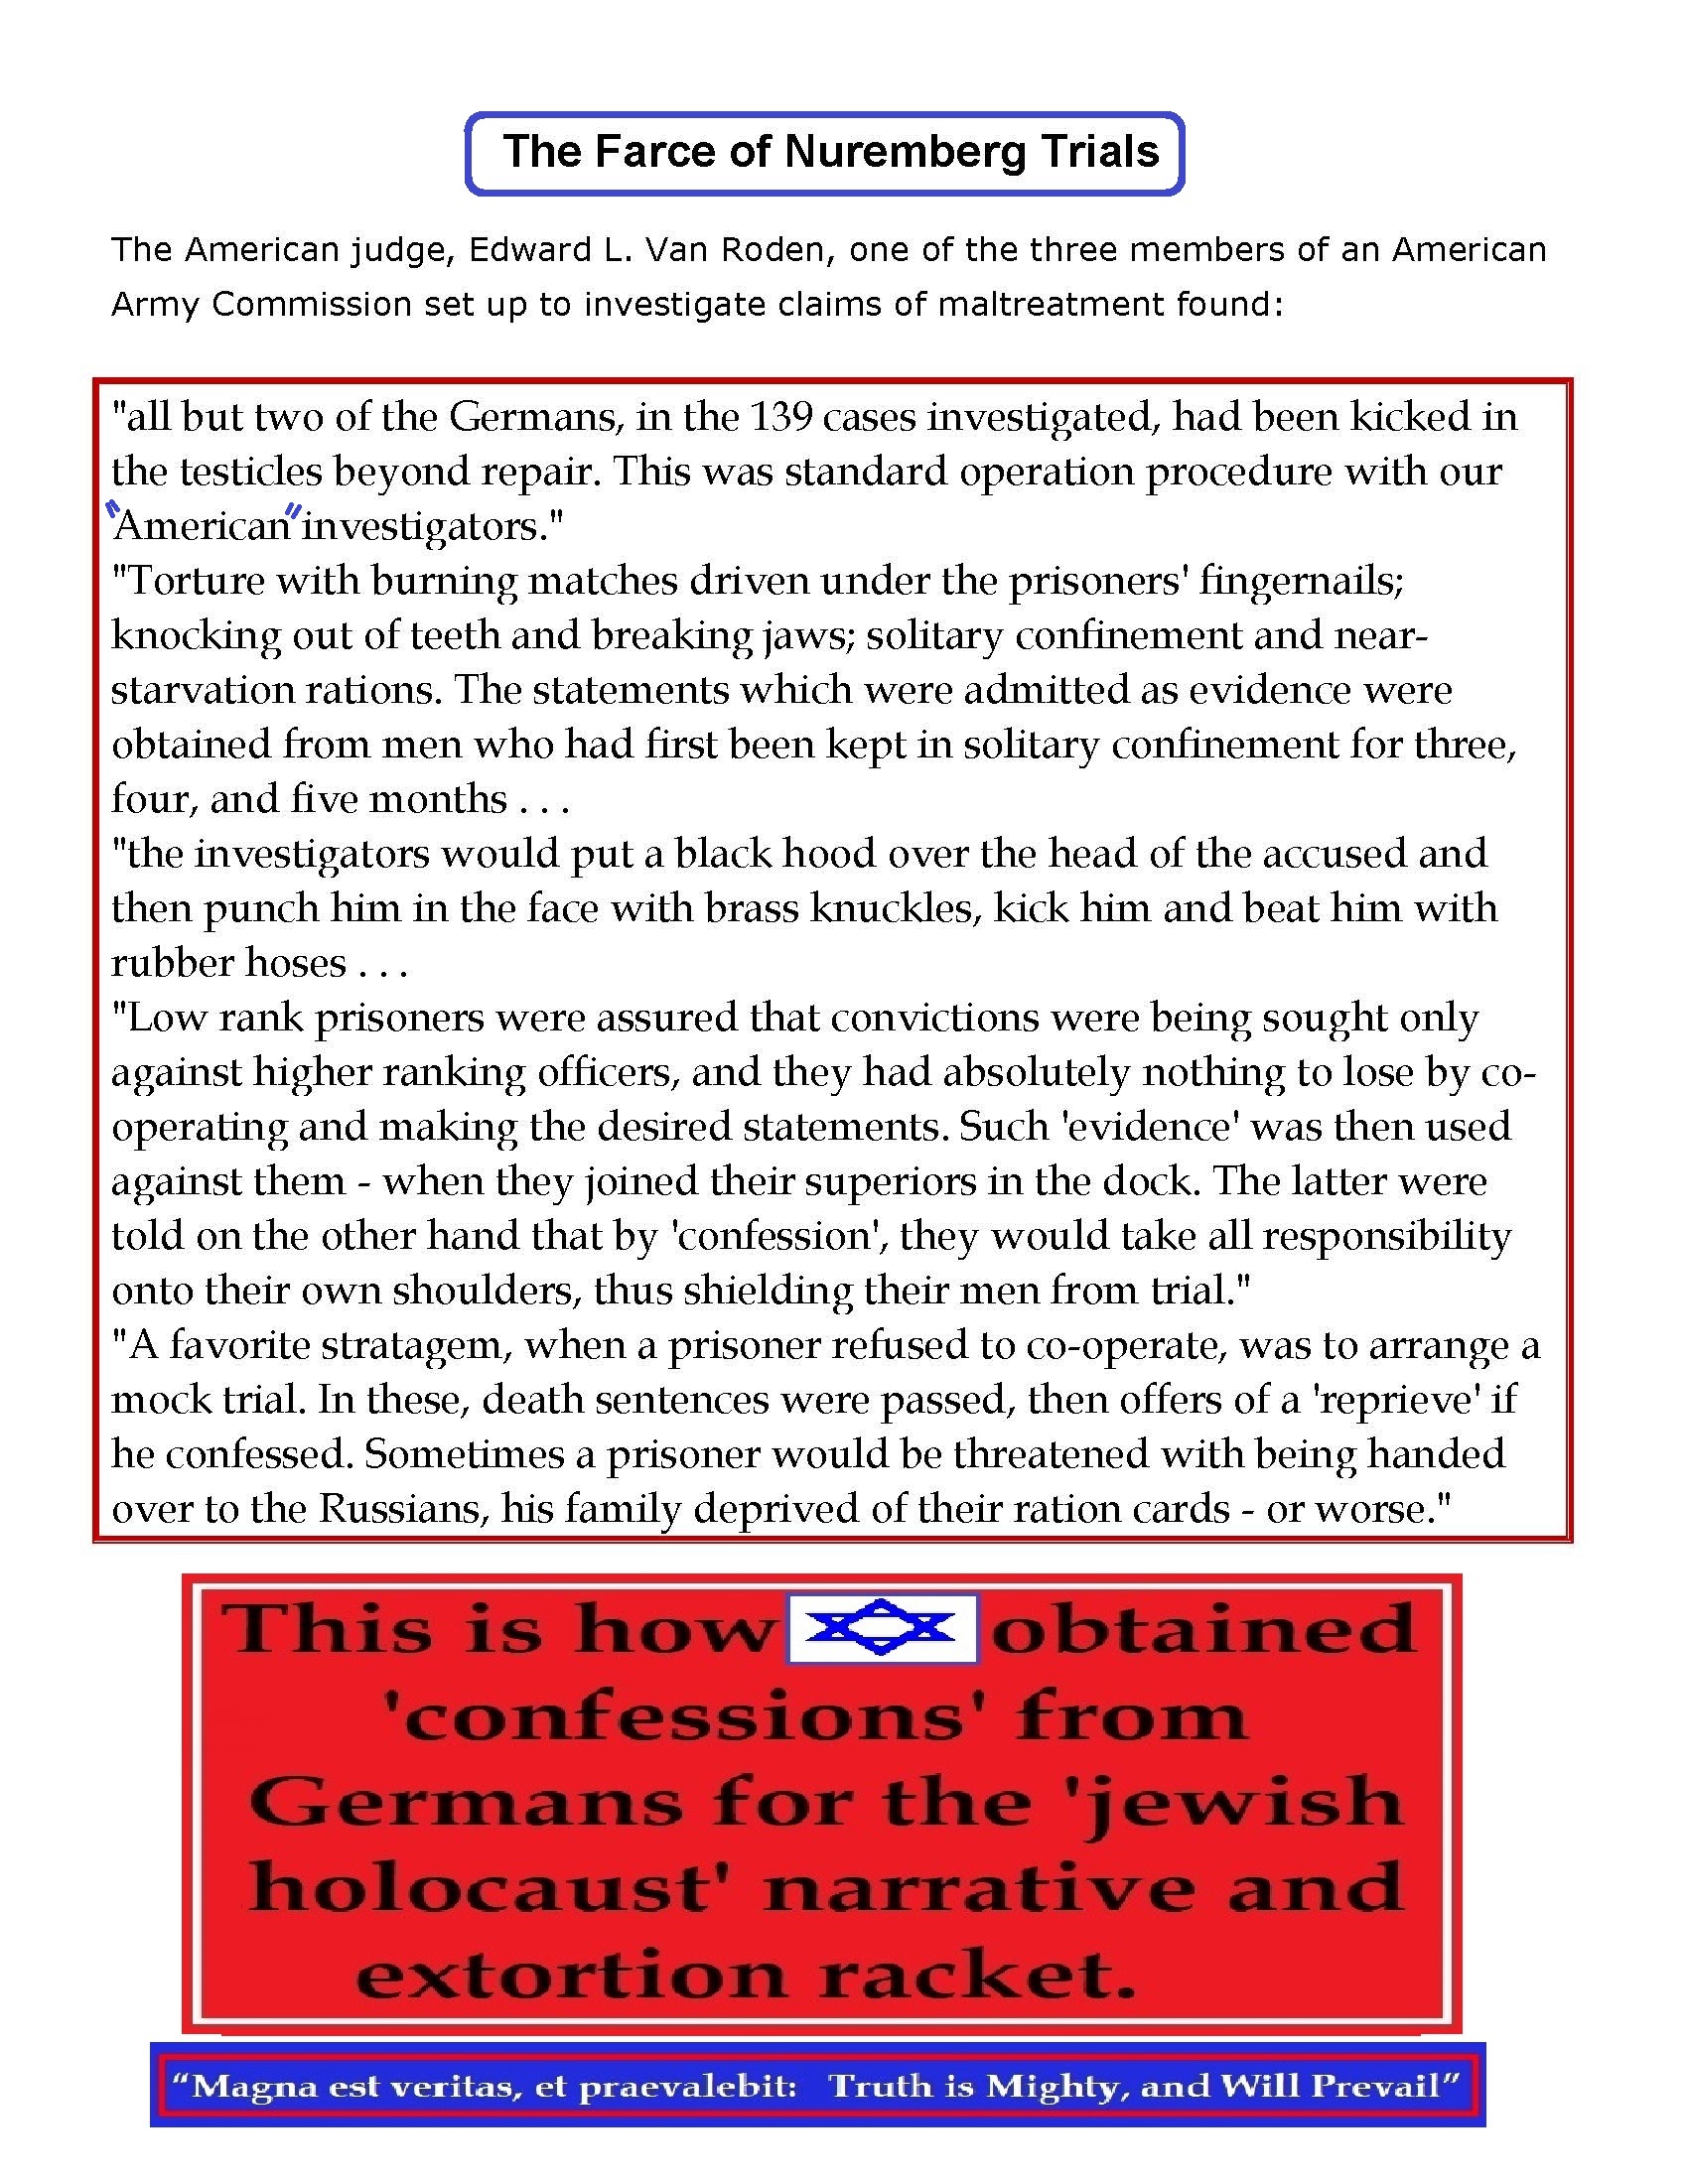 The Farce of Nuremberg Trials_Page_1 Modified